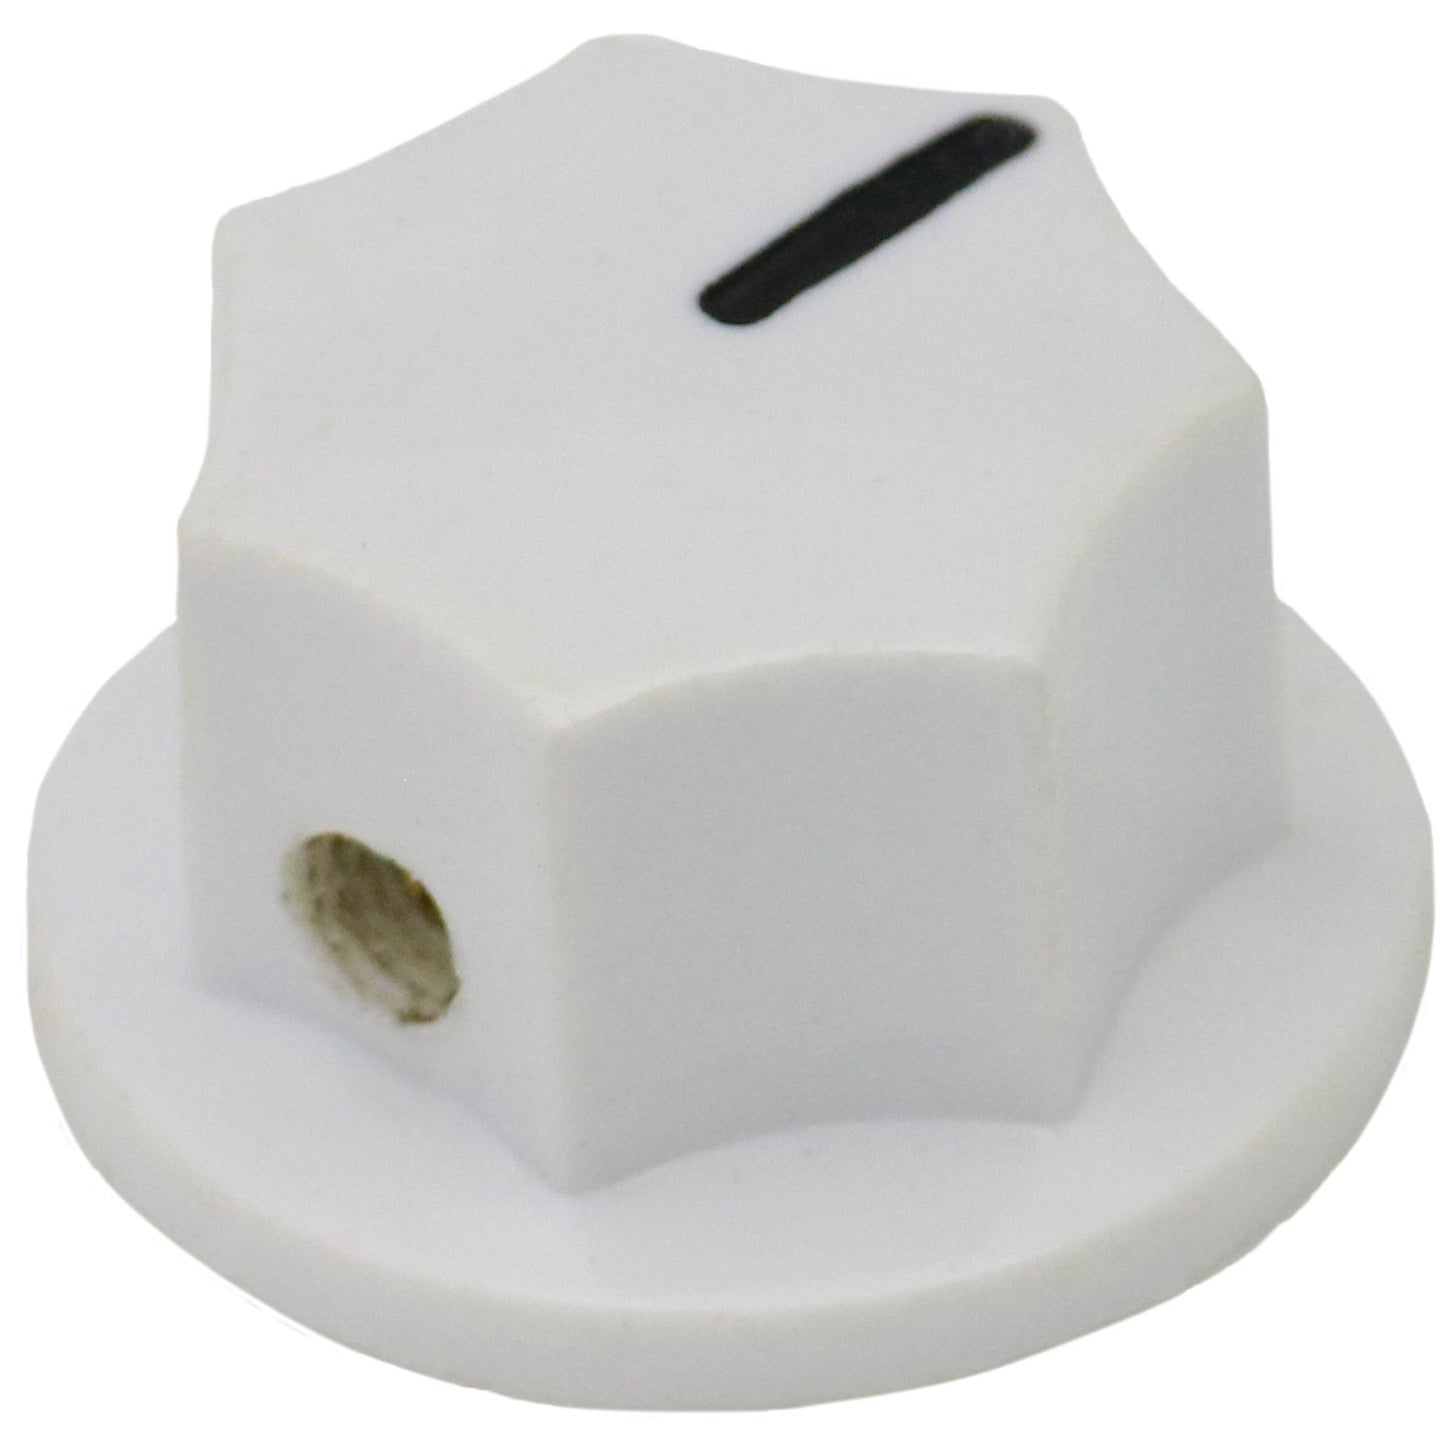 Large Skirted 7-Sided Guitar / Pedal Control Knob